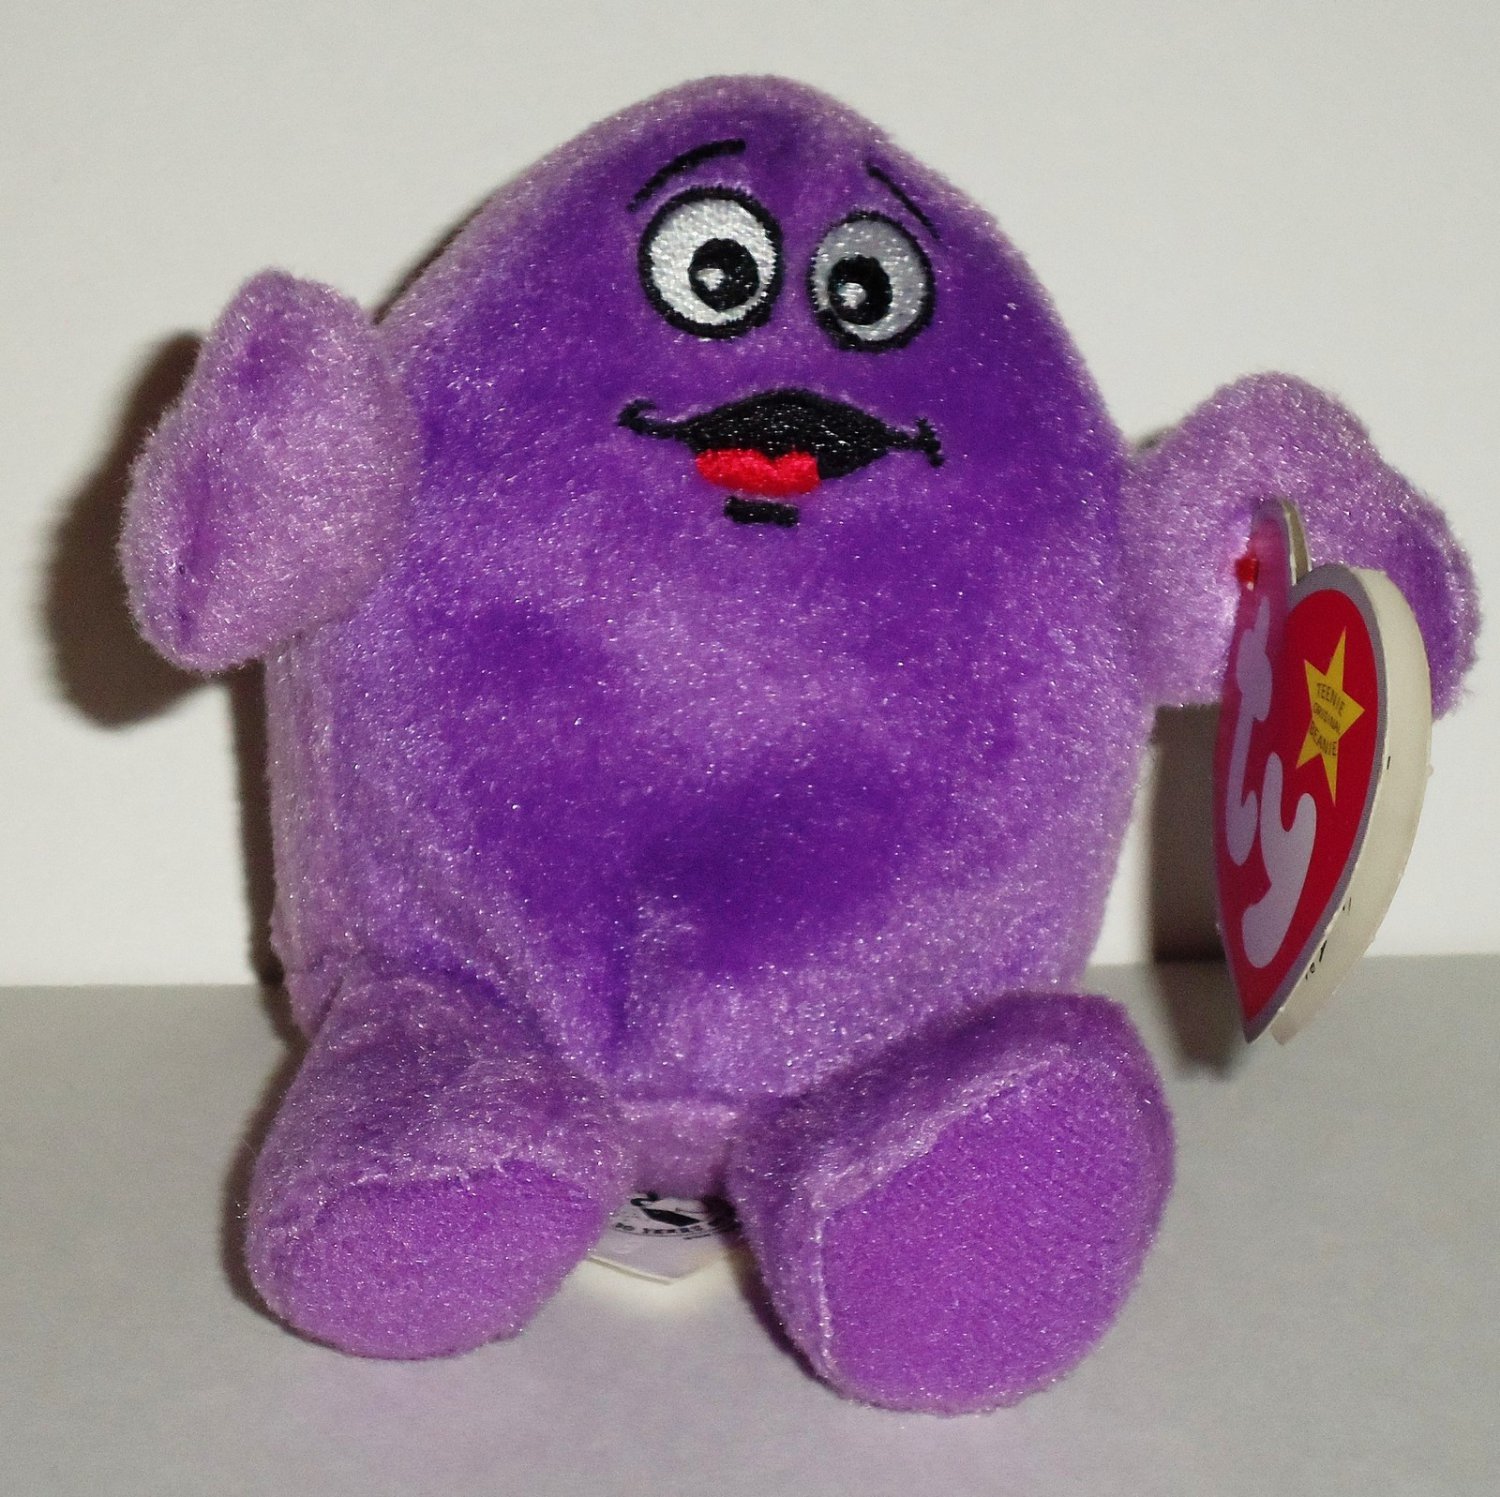 2004 25th Anniversary Ty McDonalds Happy Meal Plush Grimace the Bear #12 